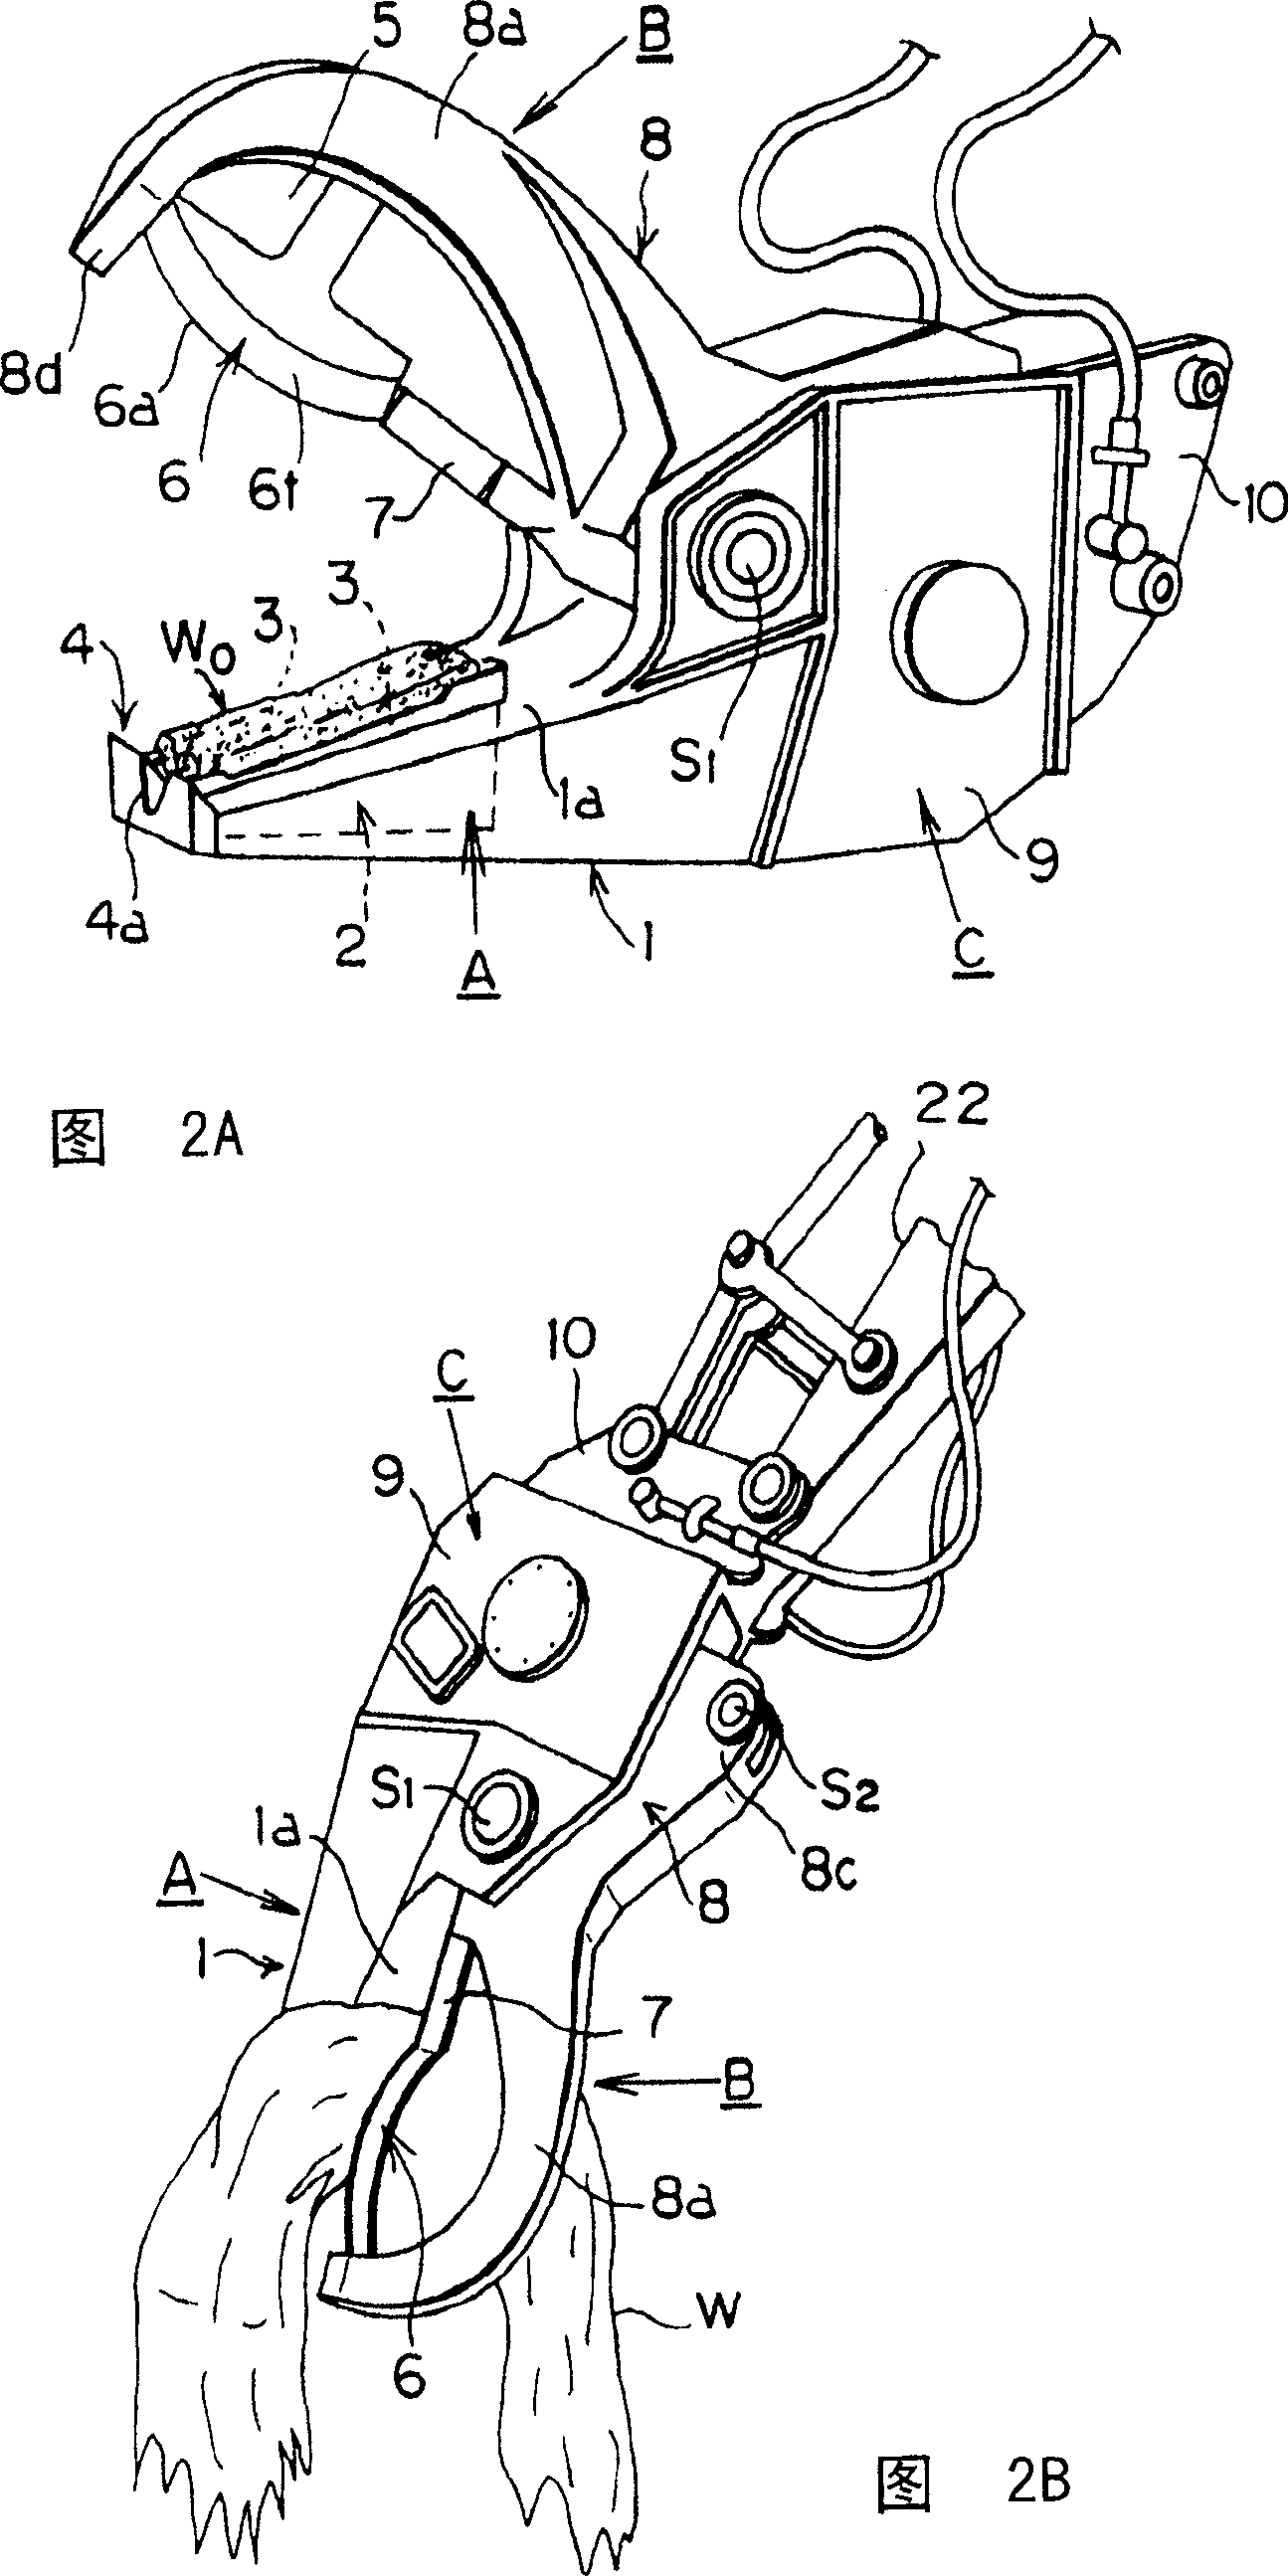 Device and method for cutting industrial waste